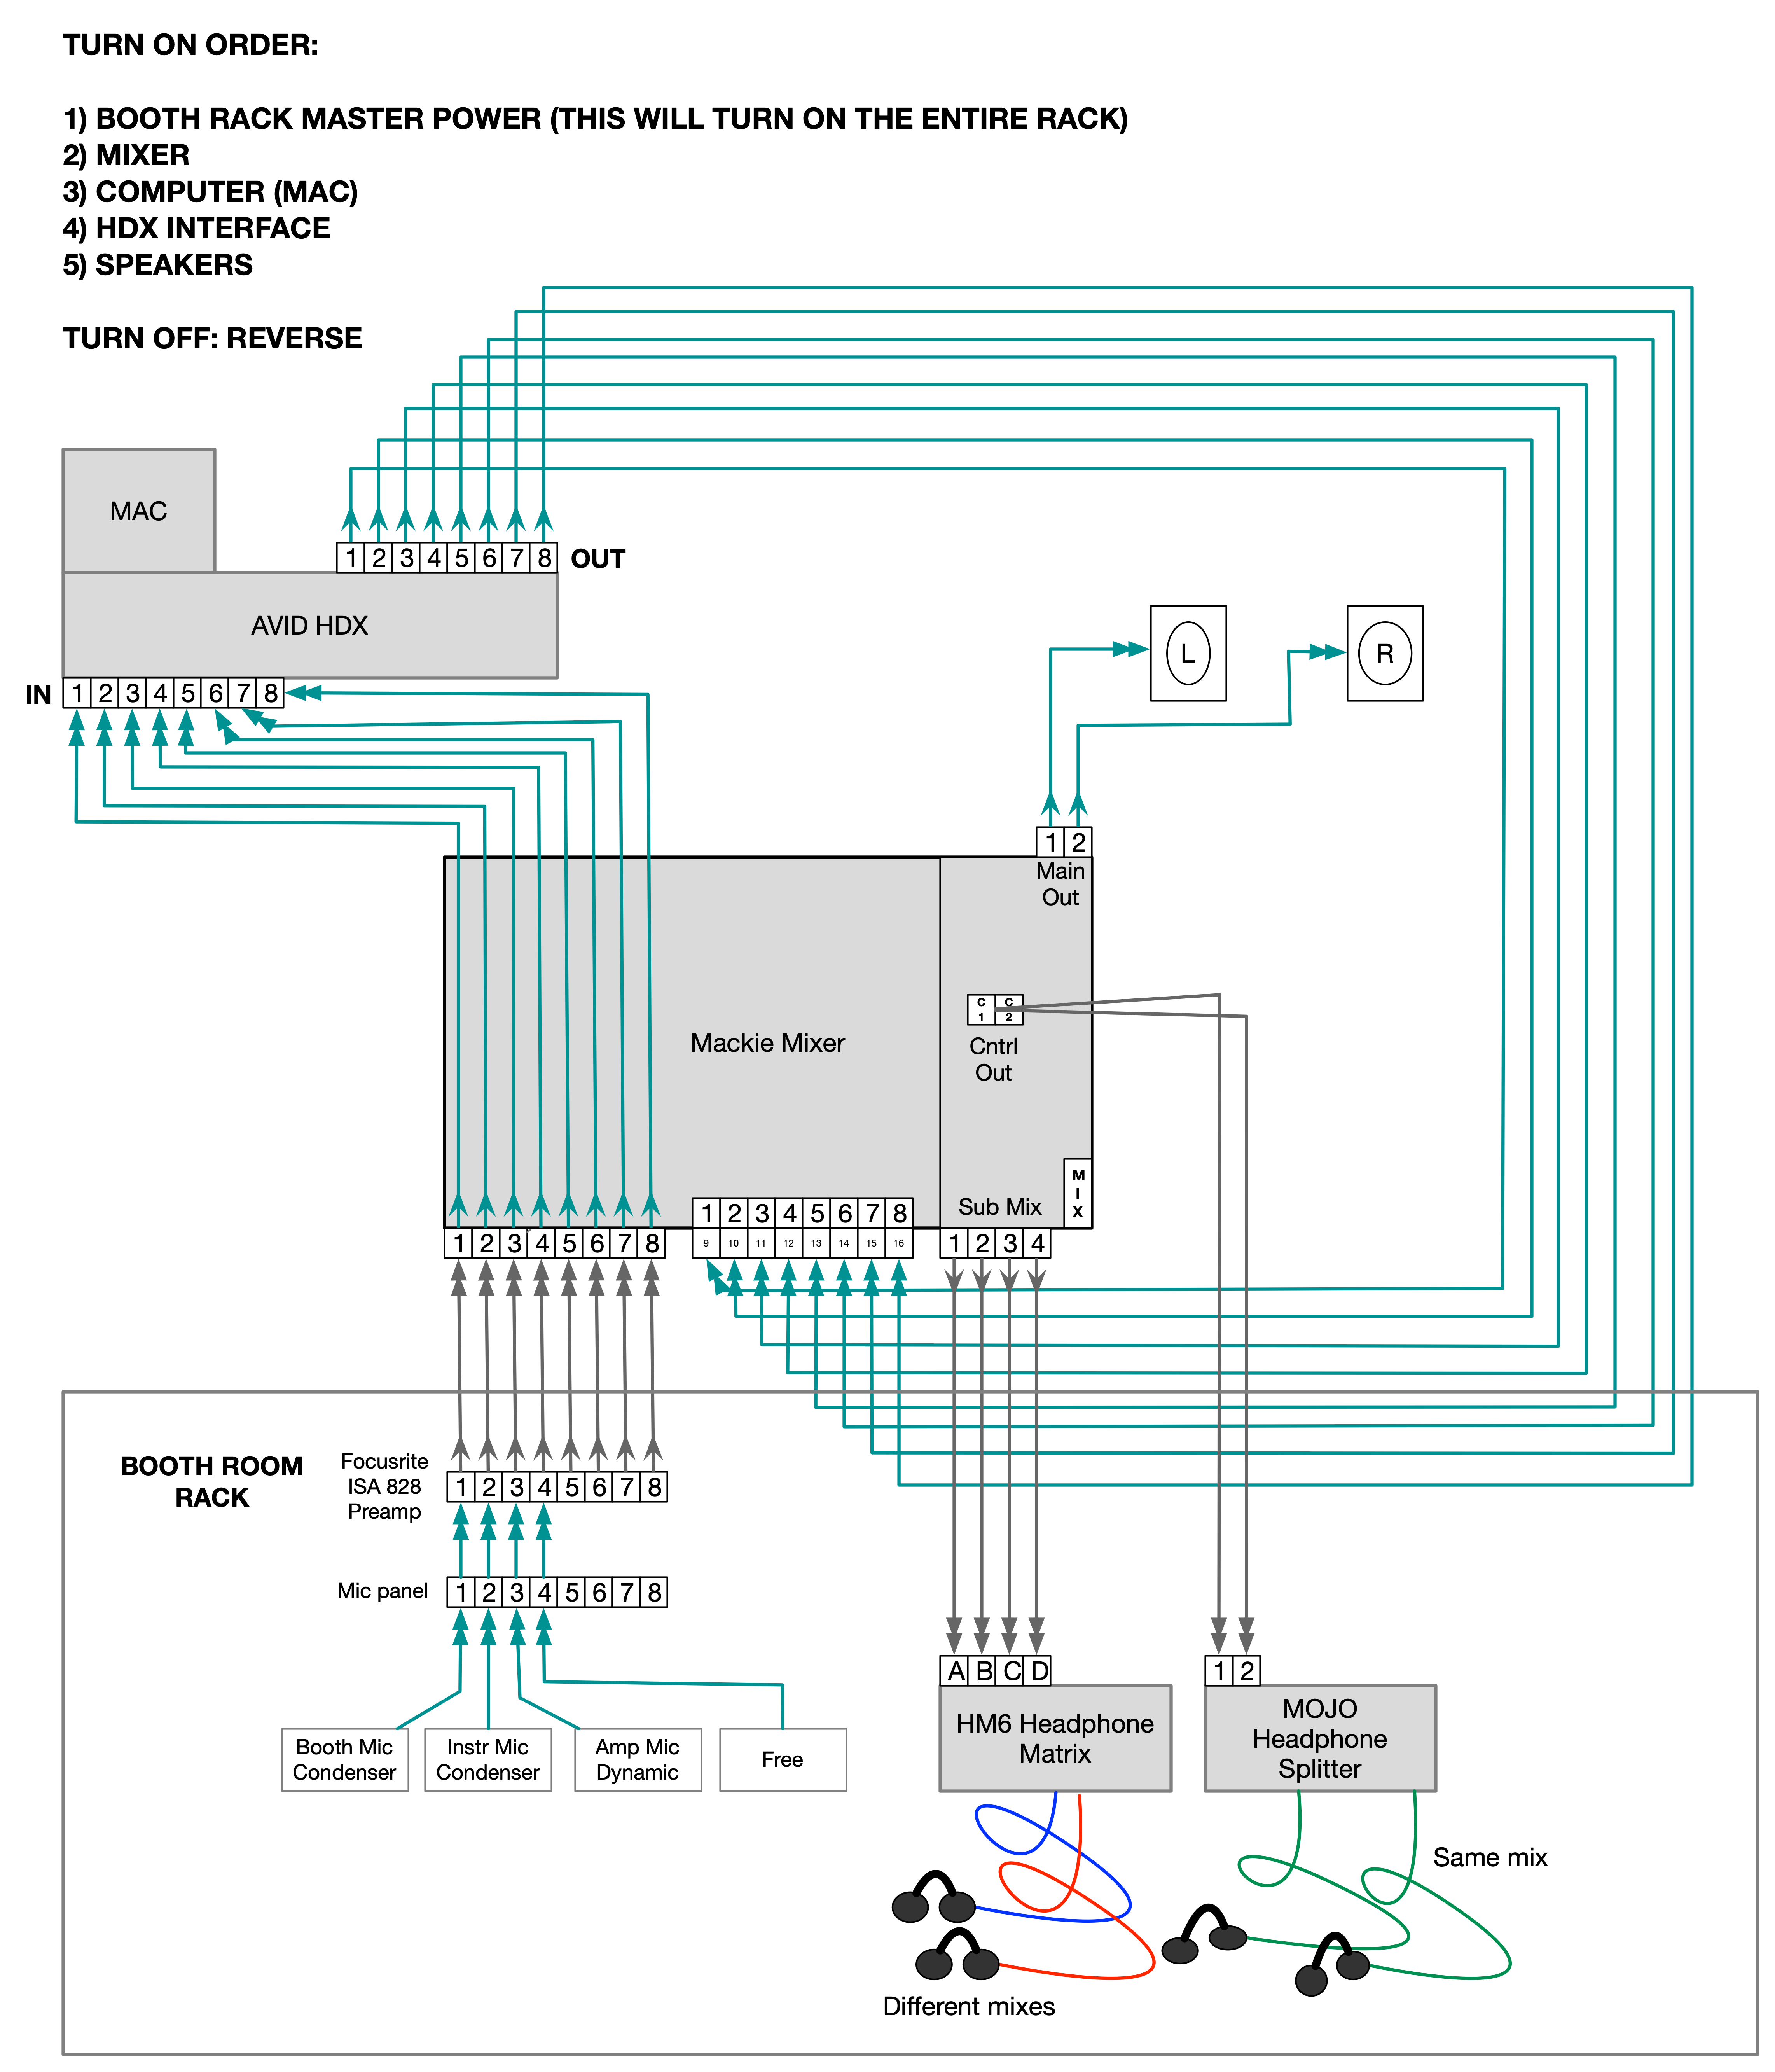 mb2508-recording-booth-station-routing.jpg